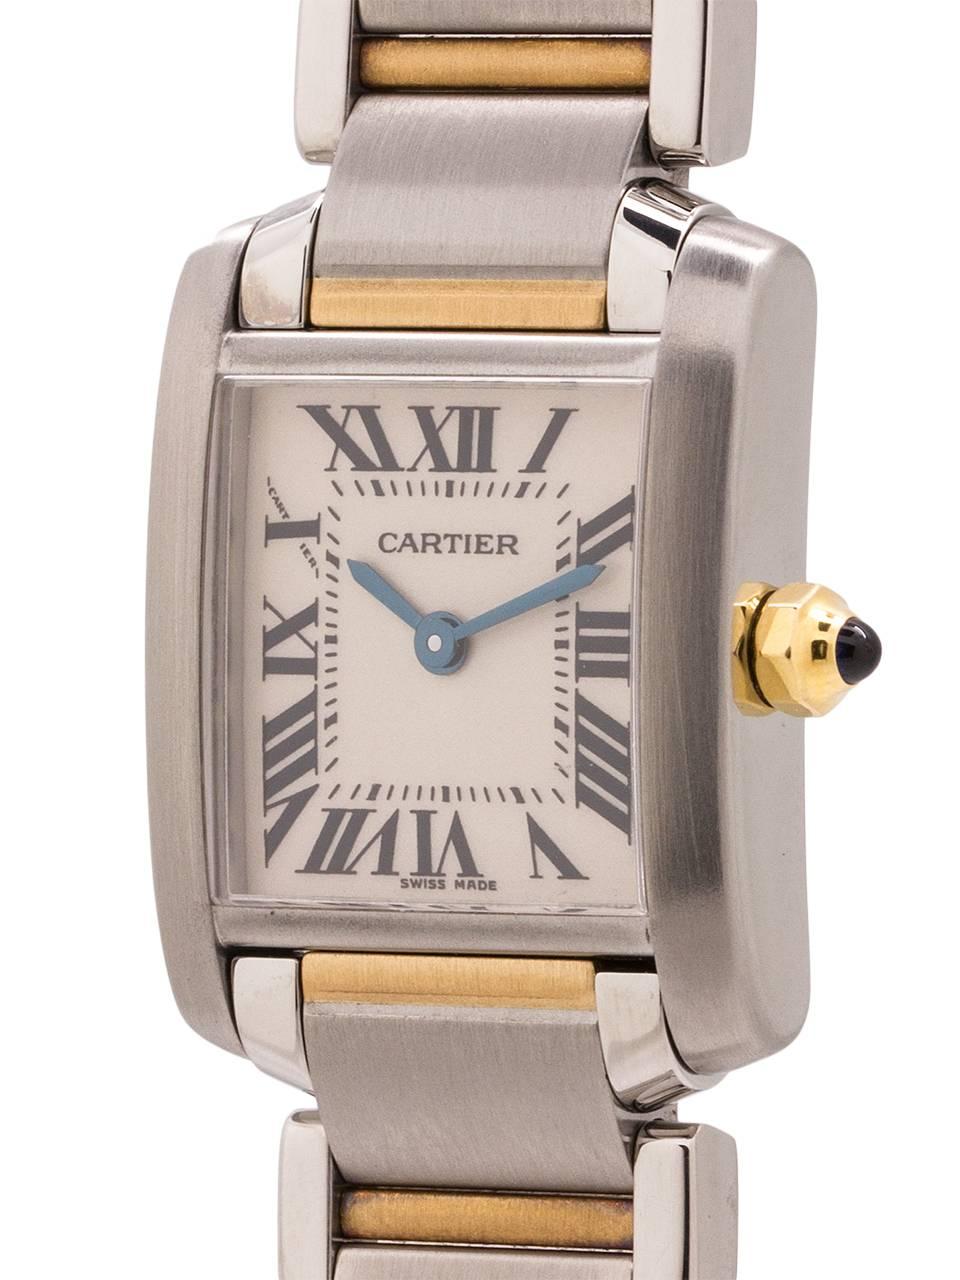 
Cartier stainless steel and 18K YG Lady Tank Francaise ref 2334 circa 2000’s. 20 X 25mm case with sapphire crystal and blue sapphire cabachon crown. Classic antique white dial with Roman numerals and blue steel hands. Powered by battery quartz